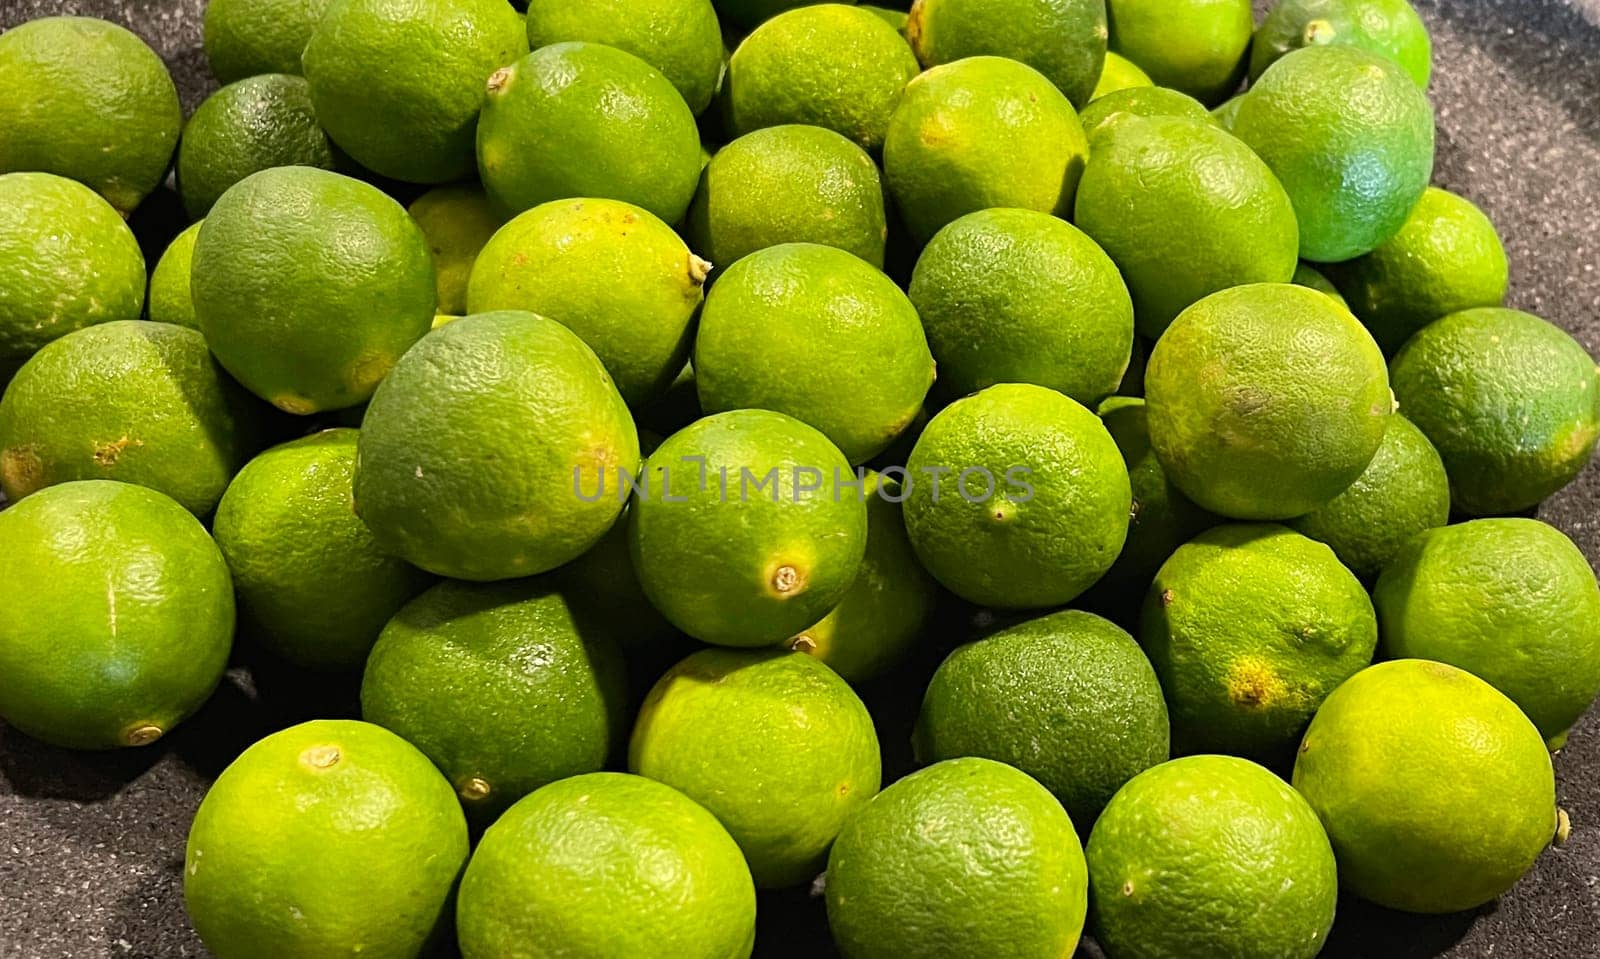 Lime Citrus Fruits In Fruit Market good as your content background